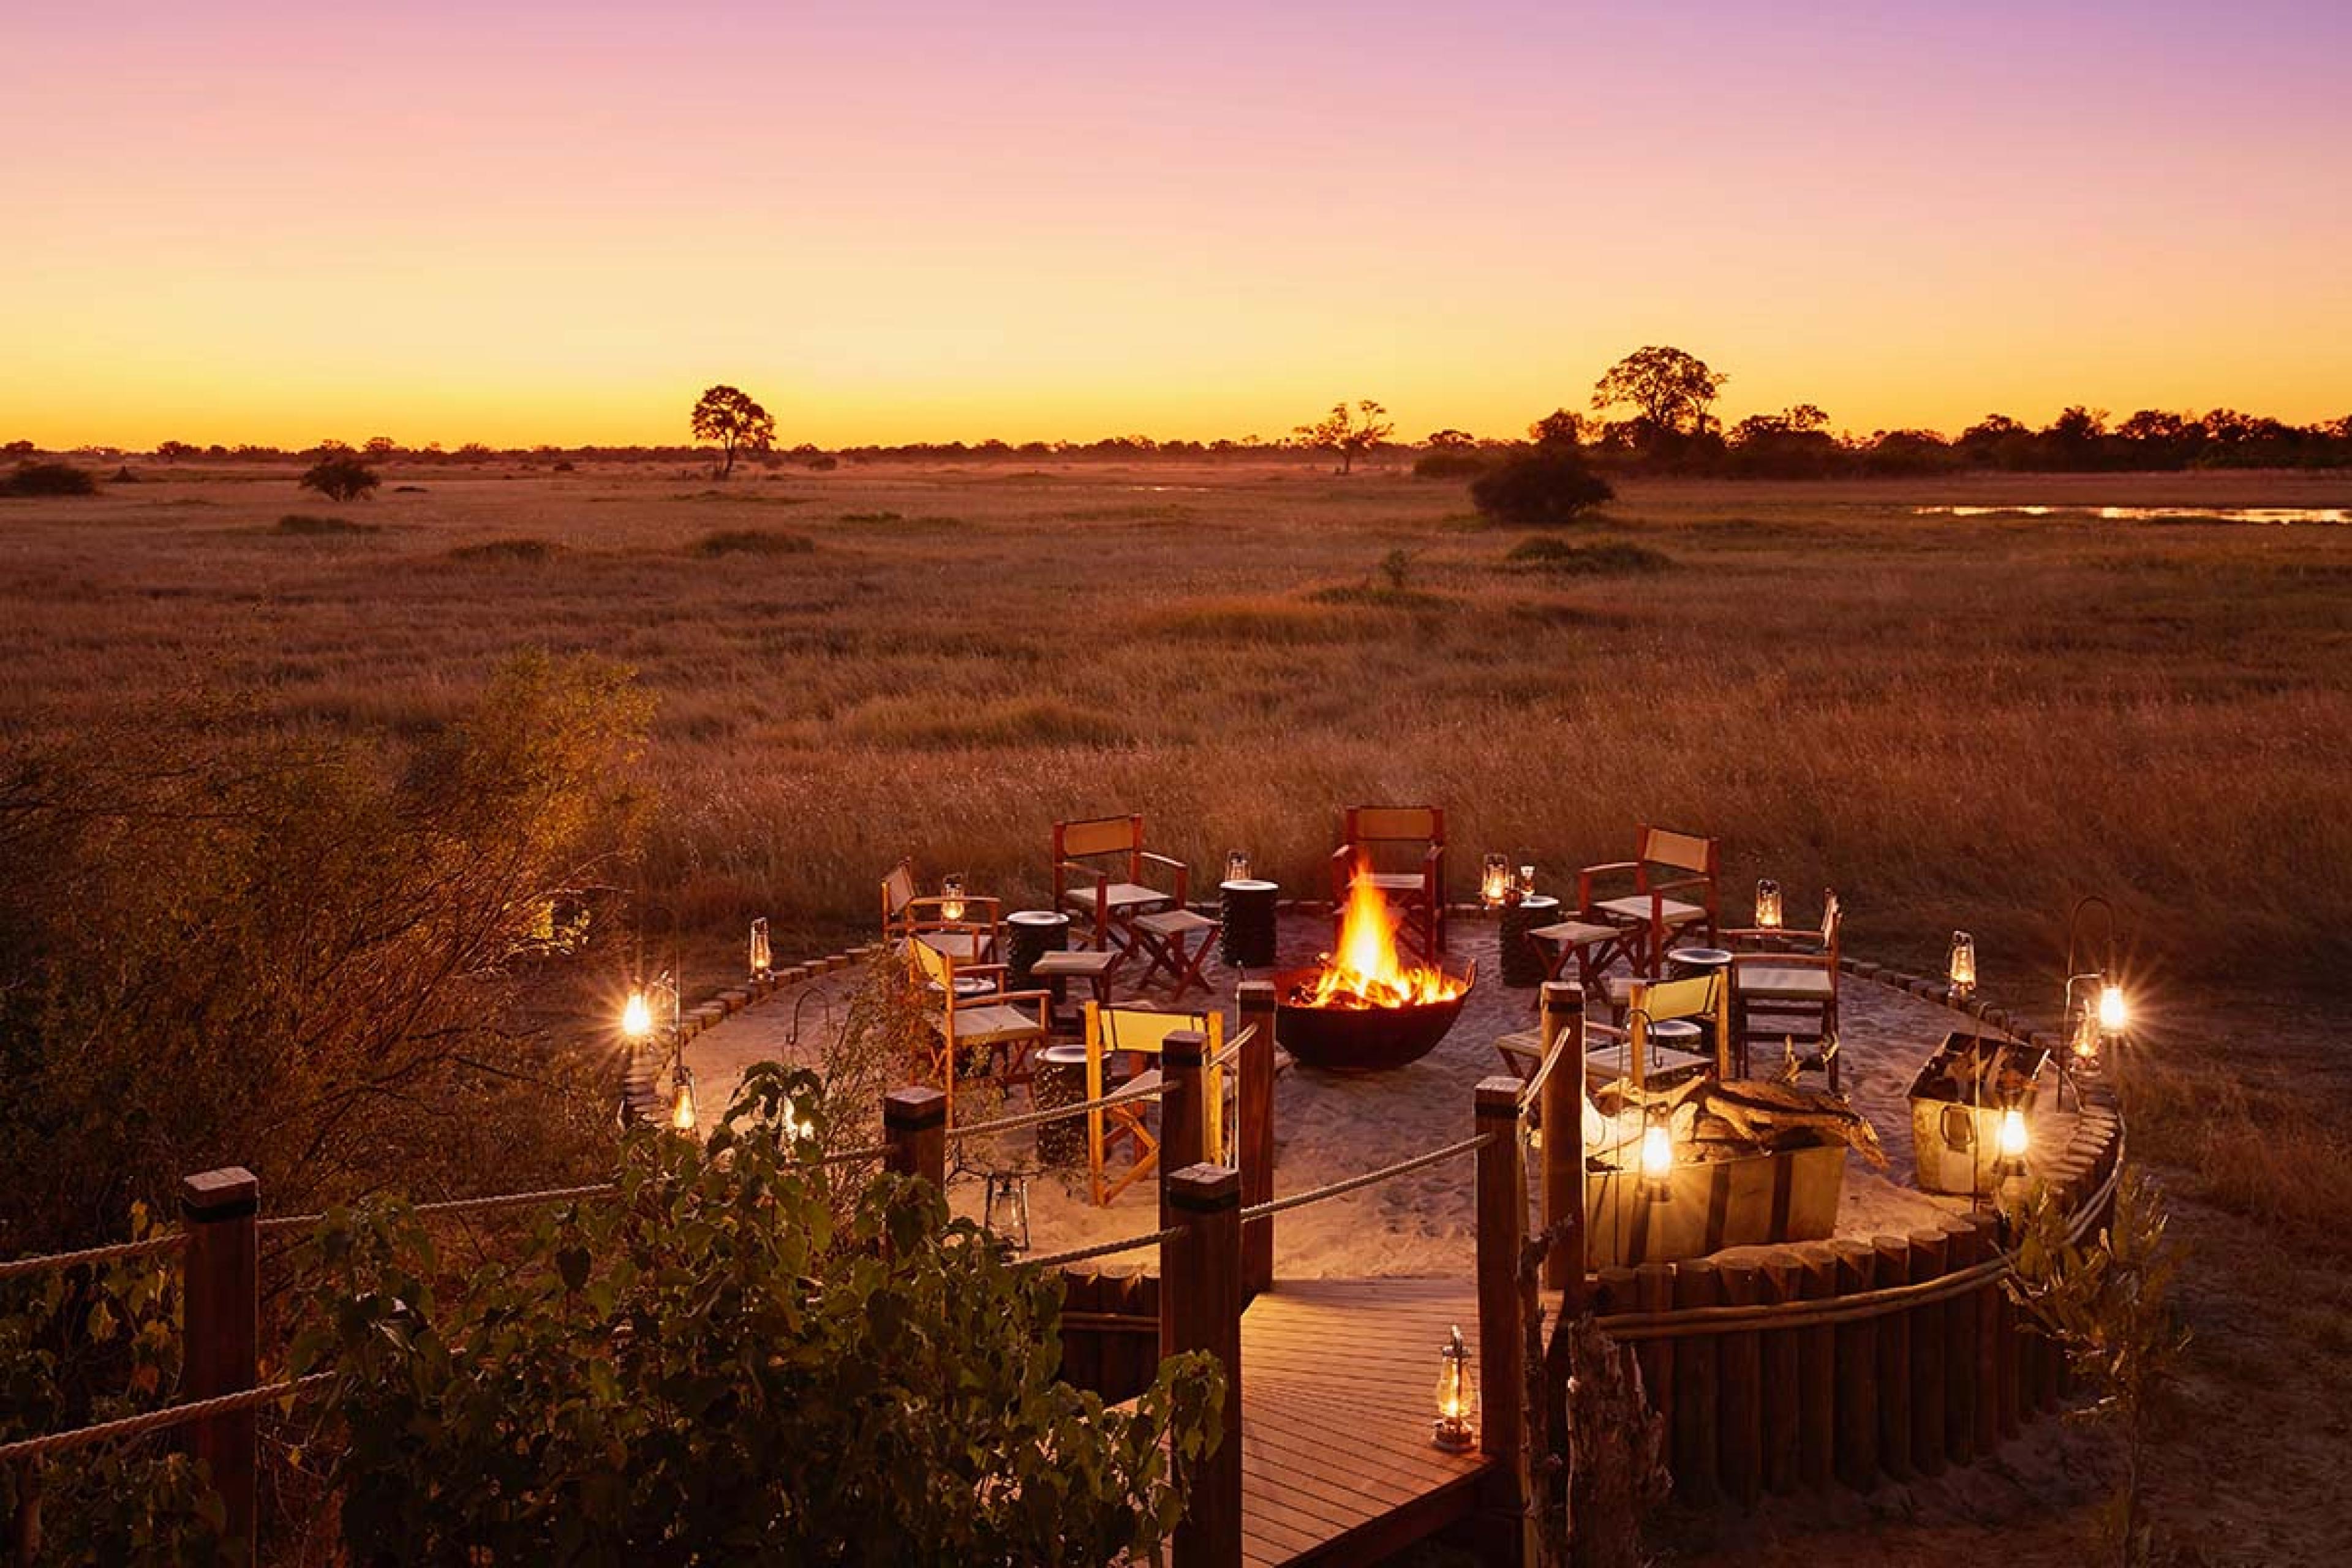 a fire pit surrounded by chairs in the middle of an African plain